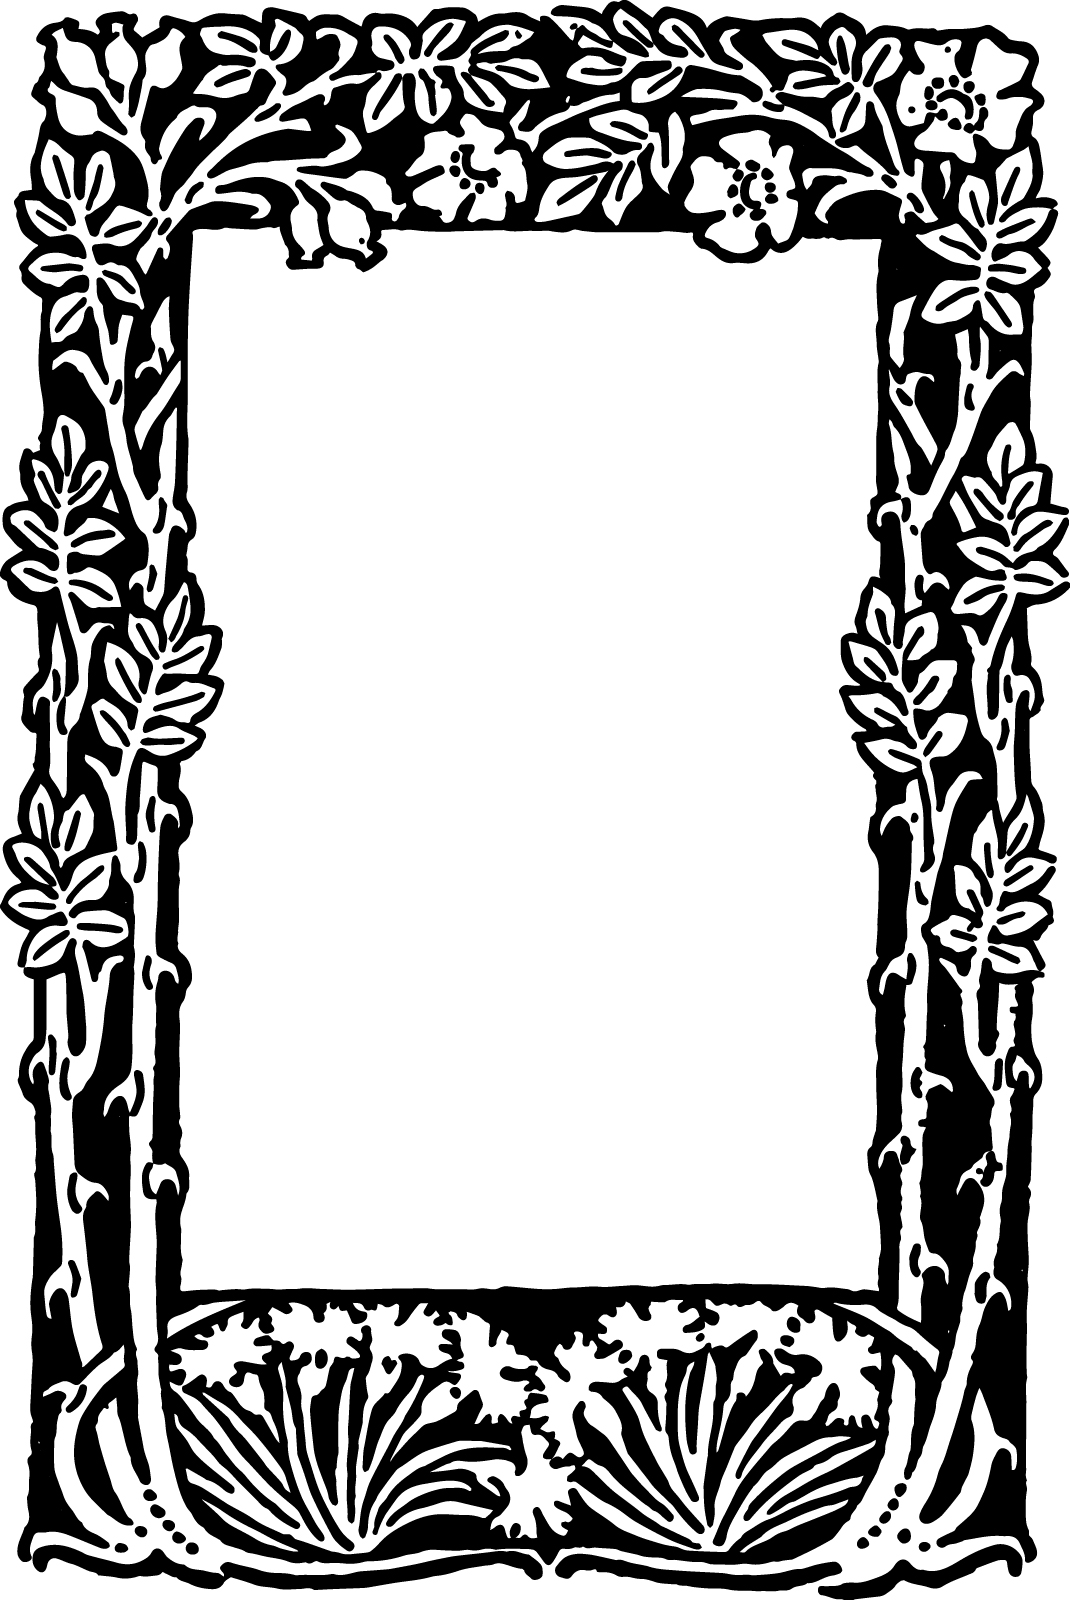 Download Free Vector - Floral Border Frame | Oh So Nifty Vintage ...